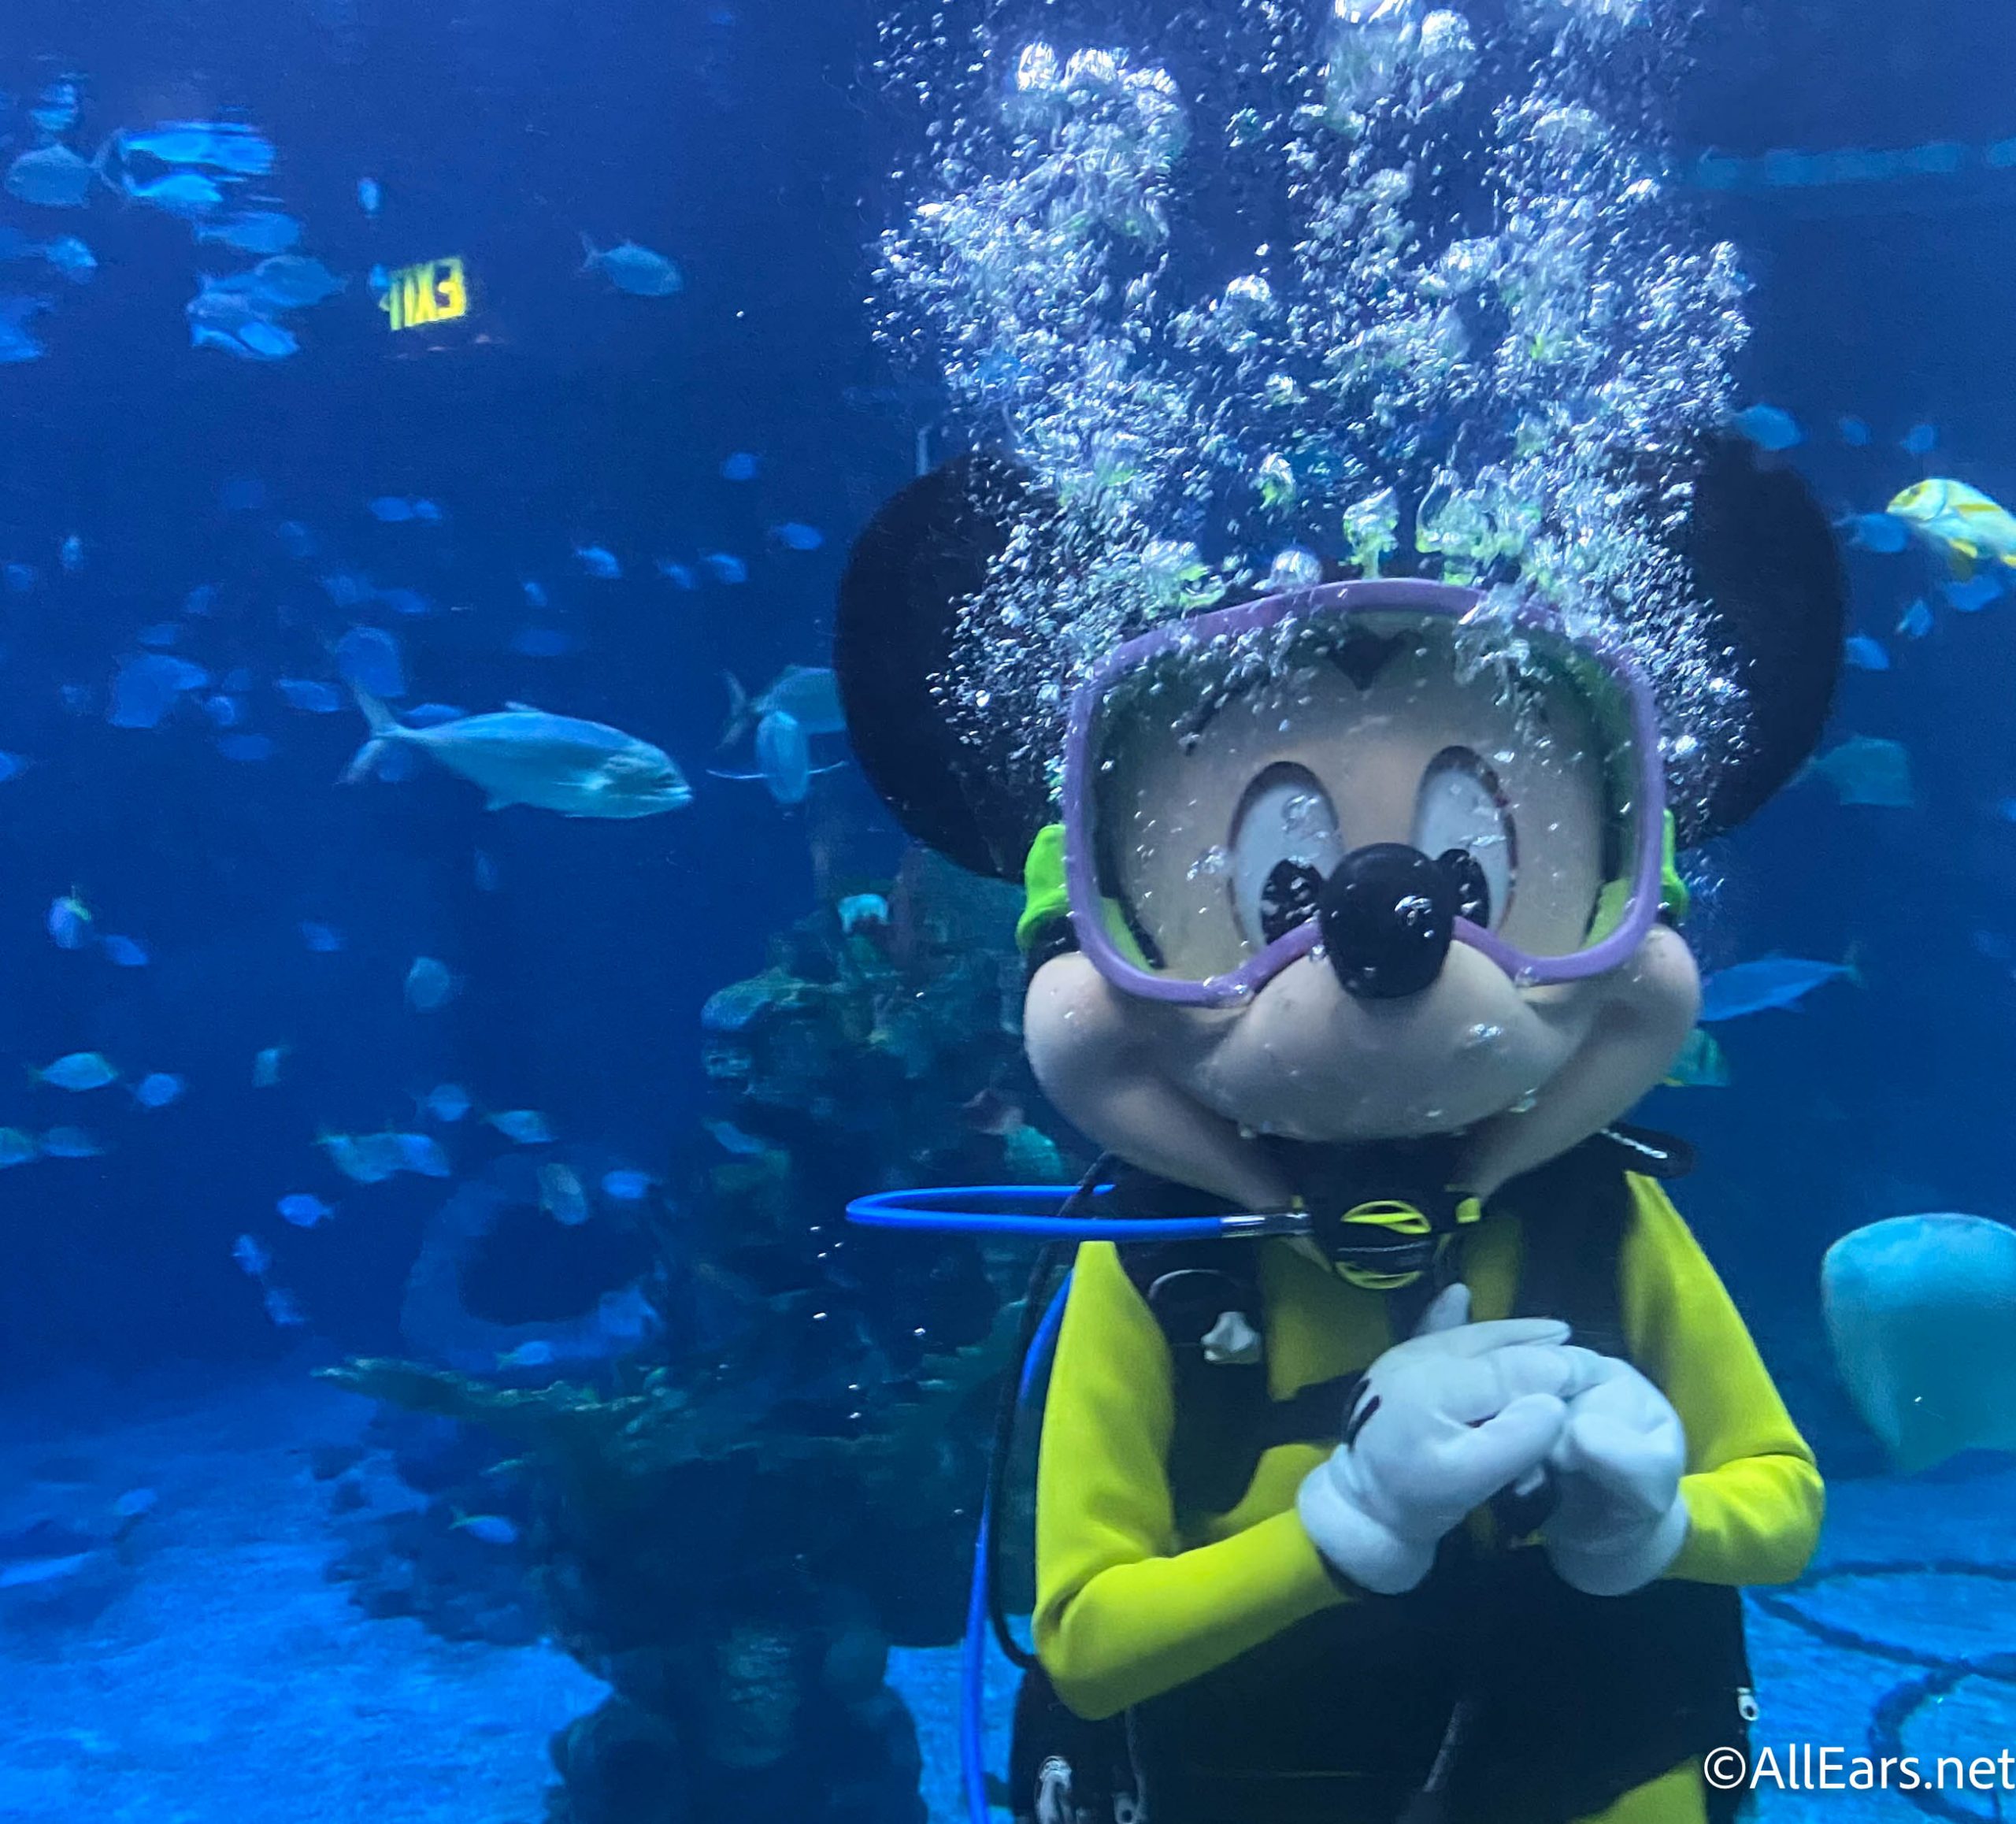 6 Weird But Kinda Cool Things You Can Do in Disney World